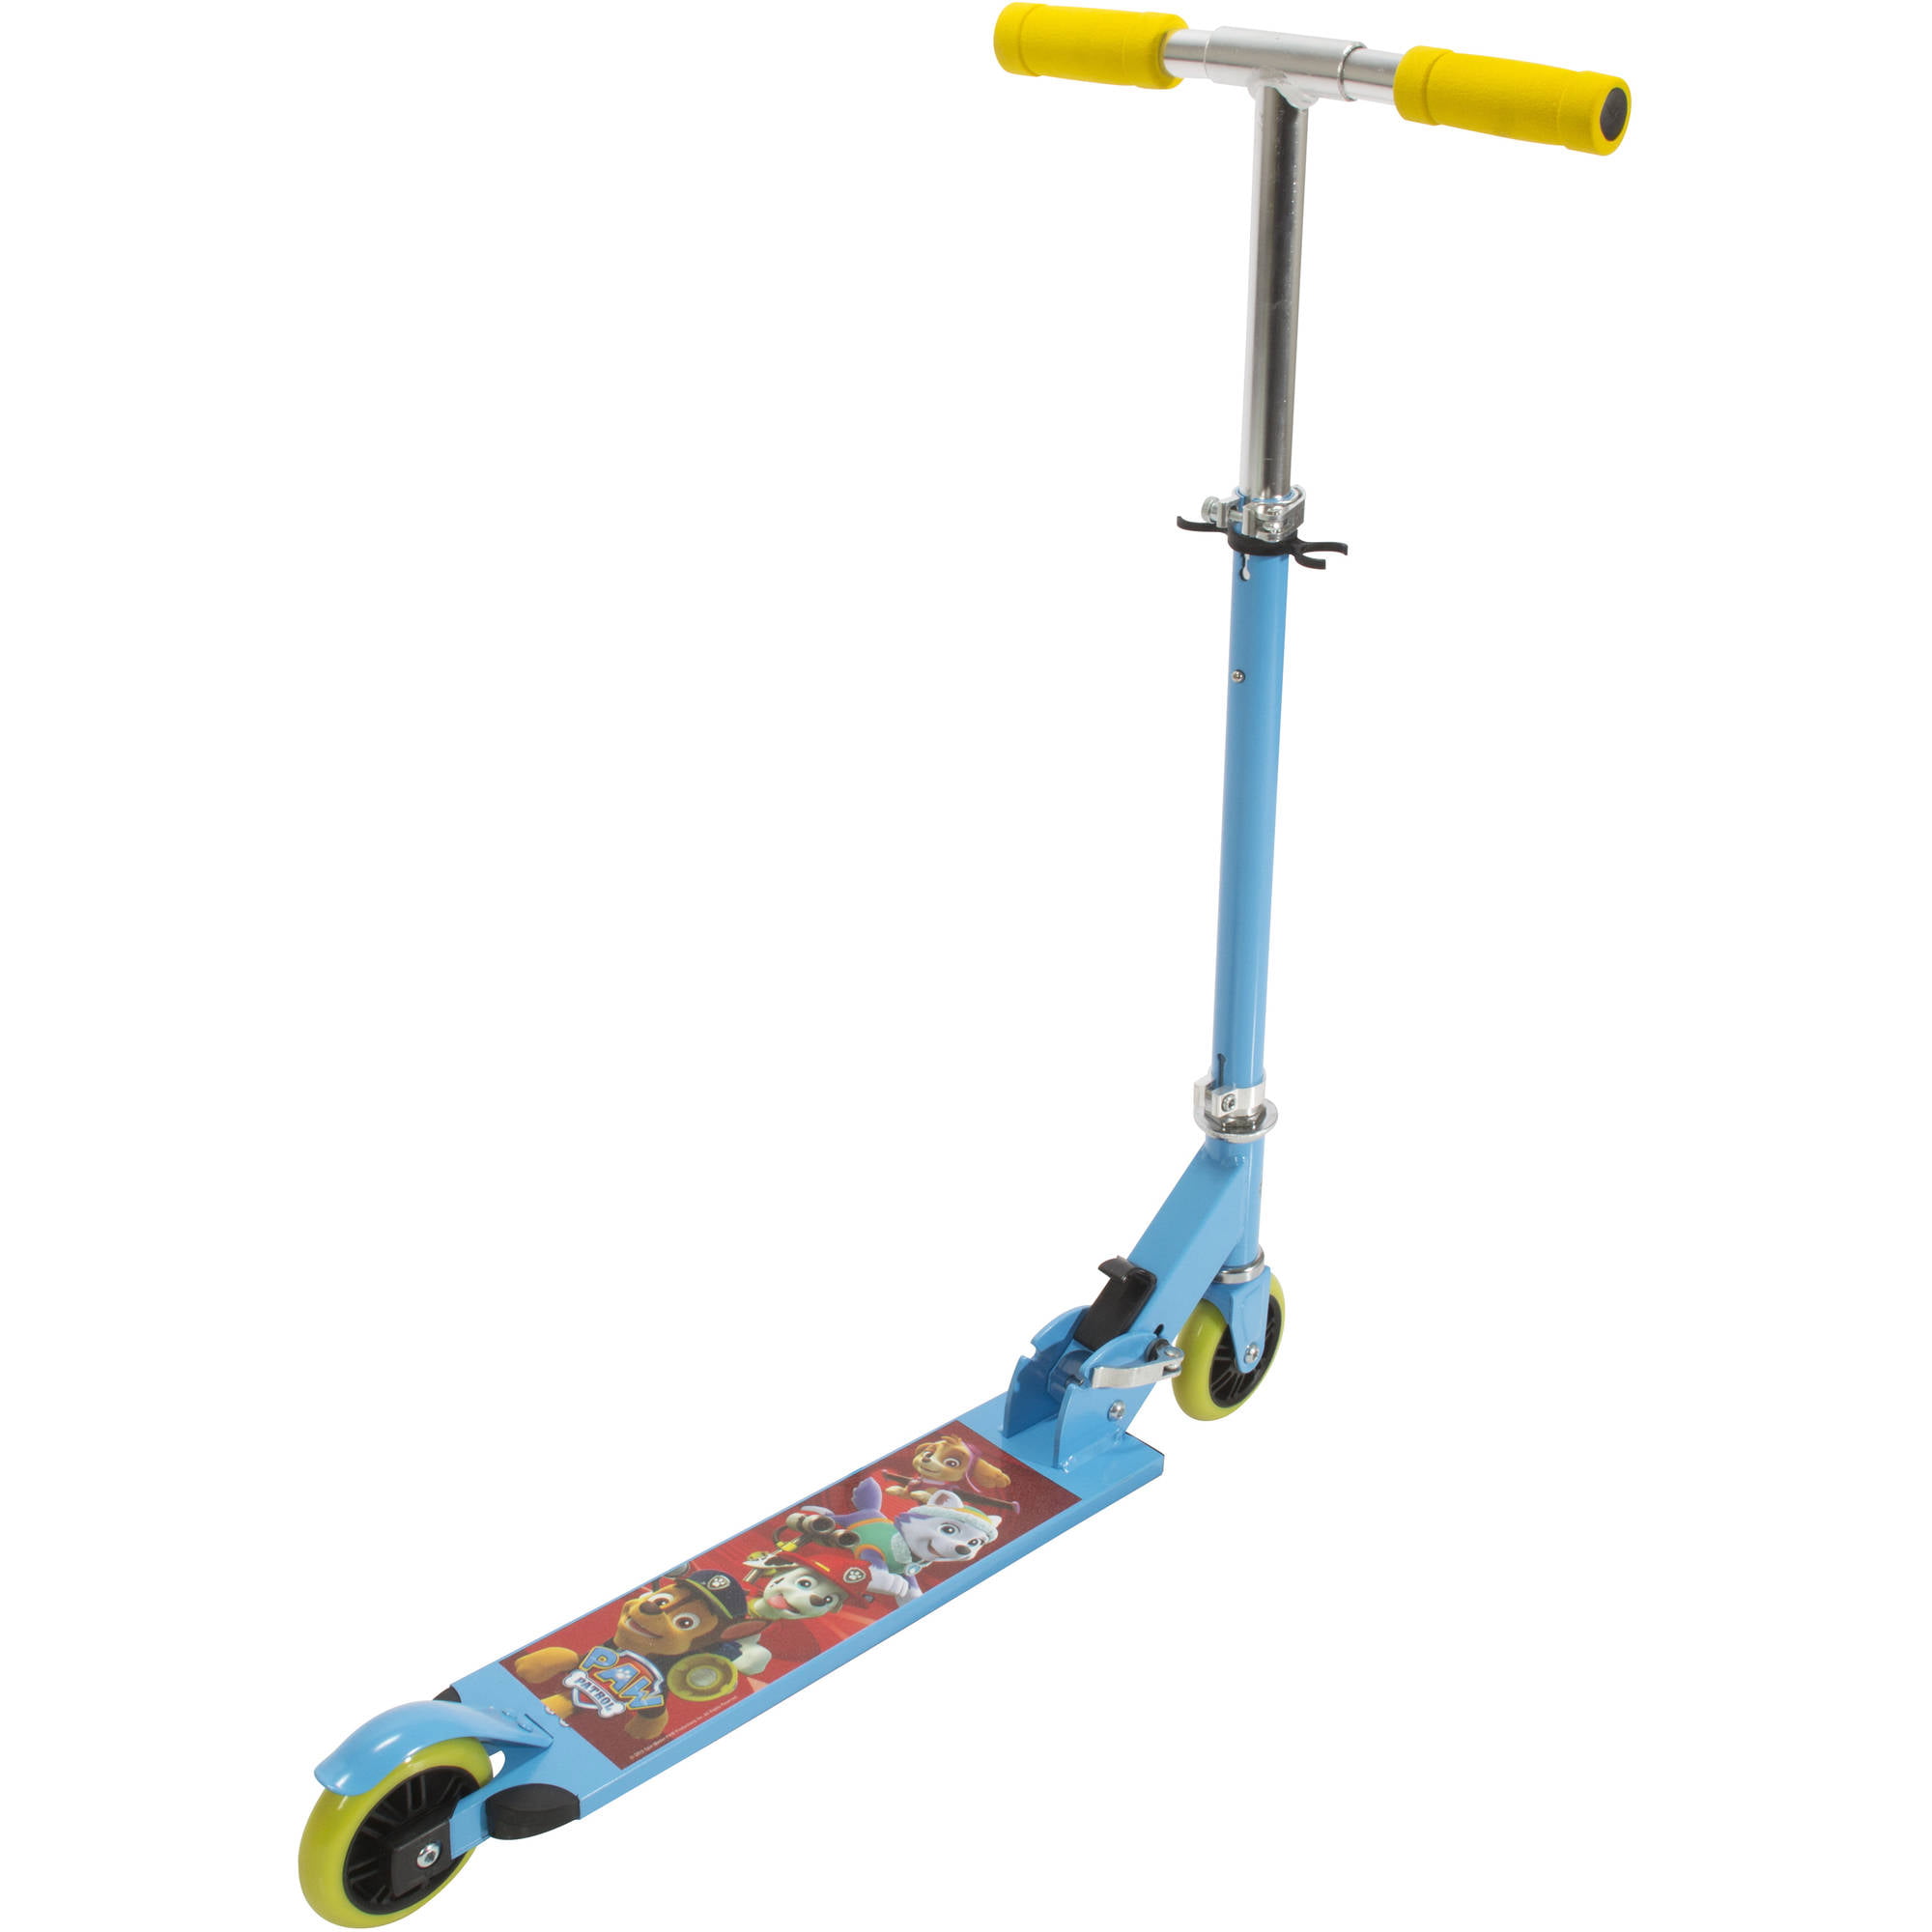 2 wheel scooters for 5 year olds